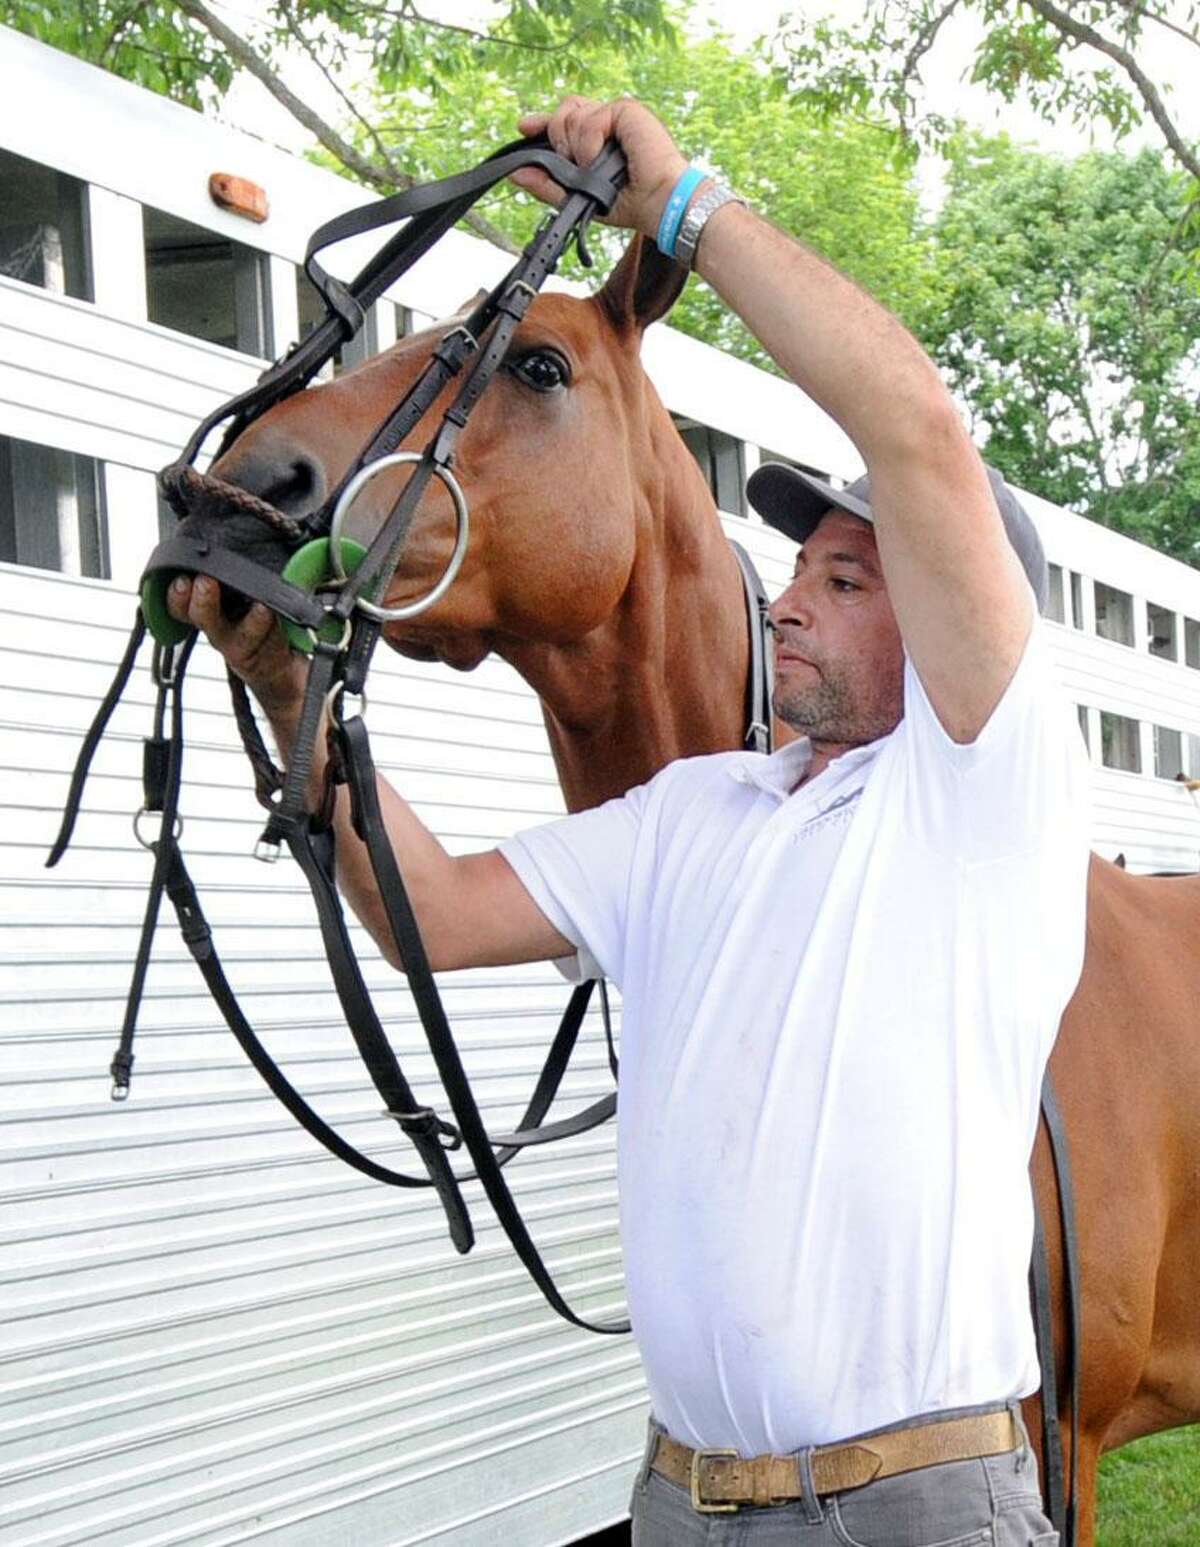 Juan Nicora, a groom, prepares Chimango, the horse of polo player Nick Manifold at the Greenwich Polo Club in Greenwich, Conn., Thursday, June 1, 2017. Mariana Castro, the director of marketing for the Greenwich Polo Club said the first match of the season is scheduled for Sunday, June 4th. Castro said the gates open at 1 p.m.(match starts at 3 p.m.) and that all are welcome. There is an entrance fee of $40 per vehicle which includes the match and parking. The Greenwich Polo Club is located off upper North Street in Greenwich, the cross street entrance is 1 Hurlingham Drive.